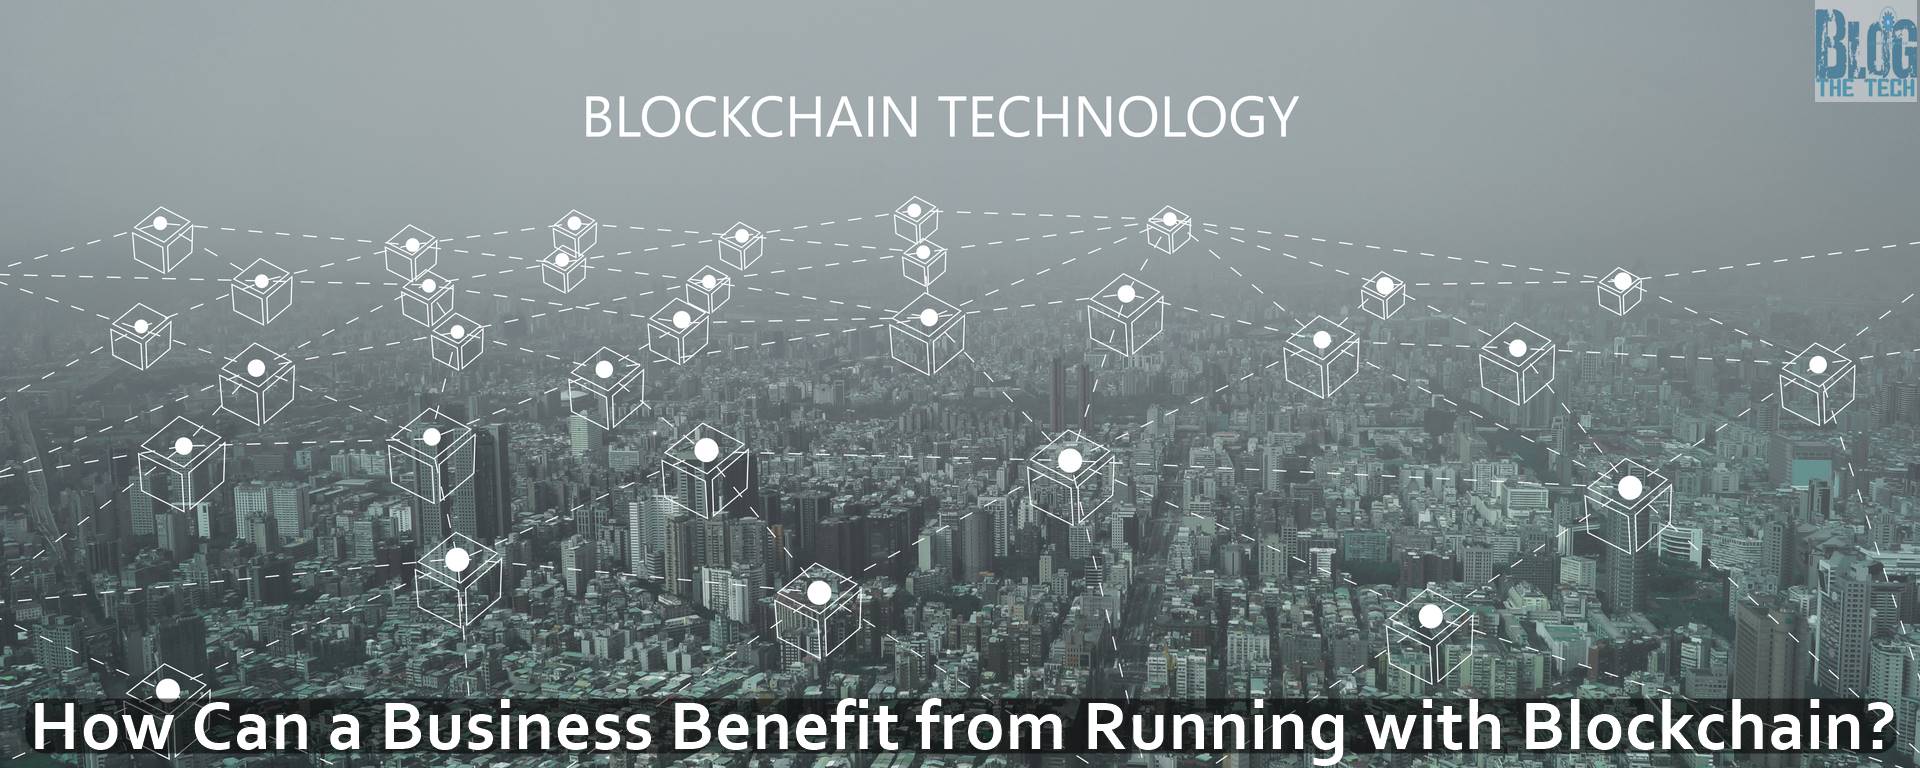 How Can a Business Benefit from Running with Blockchain?